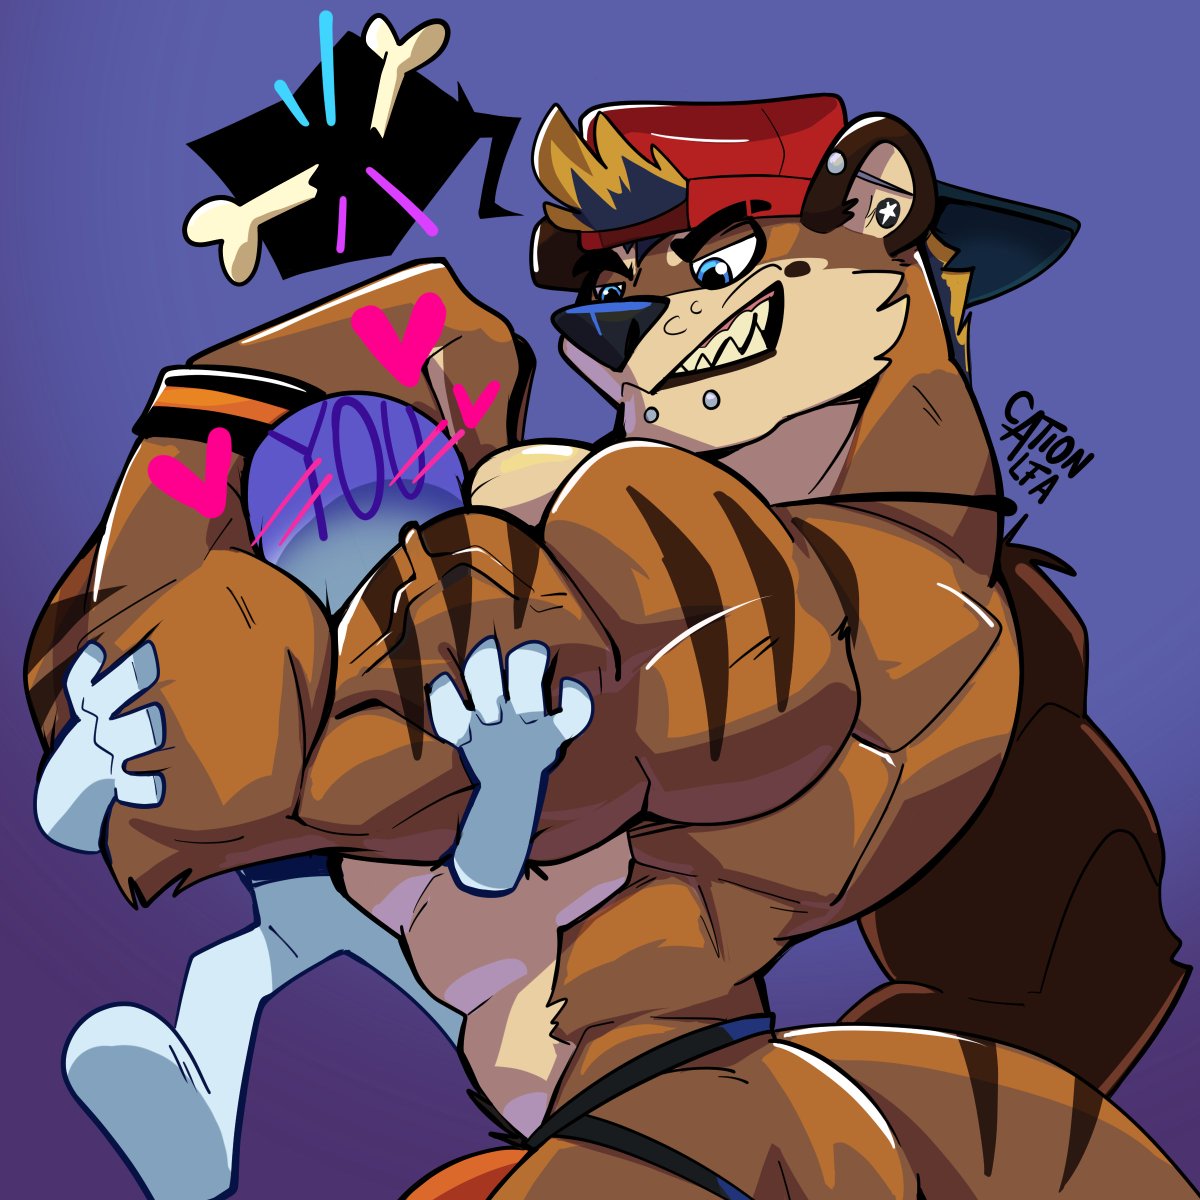 Who wants a little squeeze? ⚠️Disclaimer, some bones can be cracked⚠️ Kyo by @KyoDotter